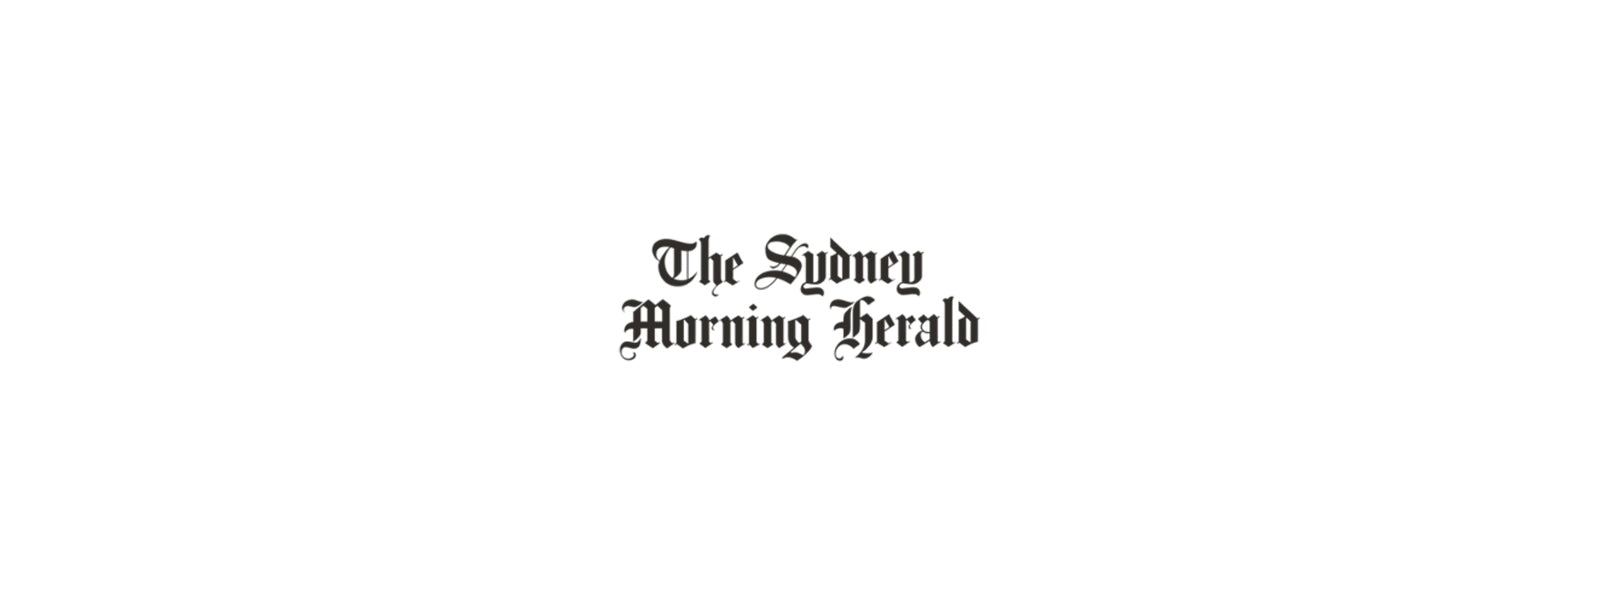 The Sydney Morning Herald — Australian Potions for Far-off Climes